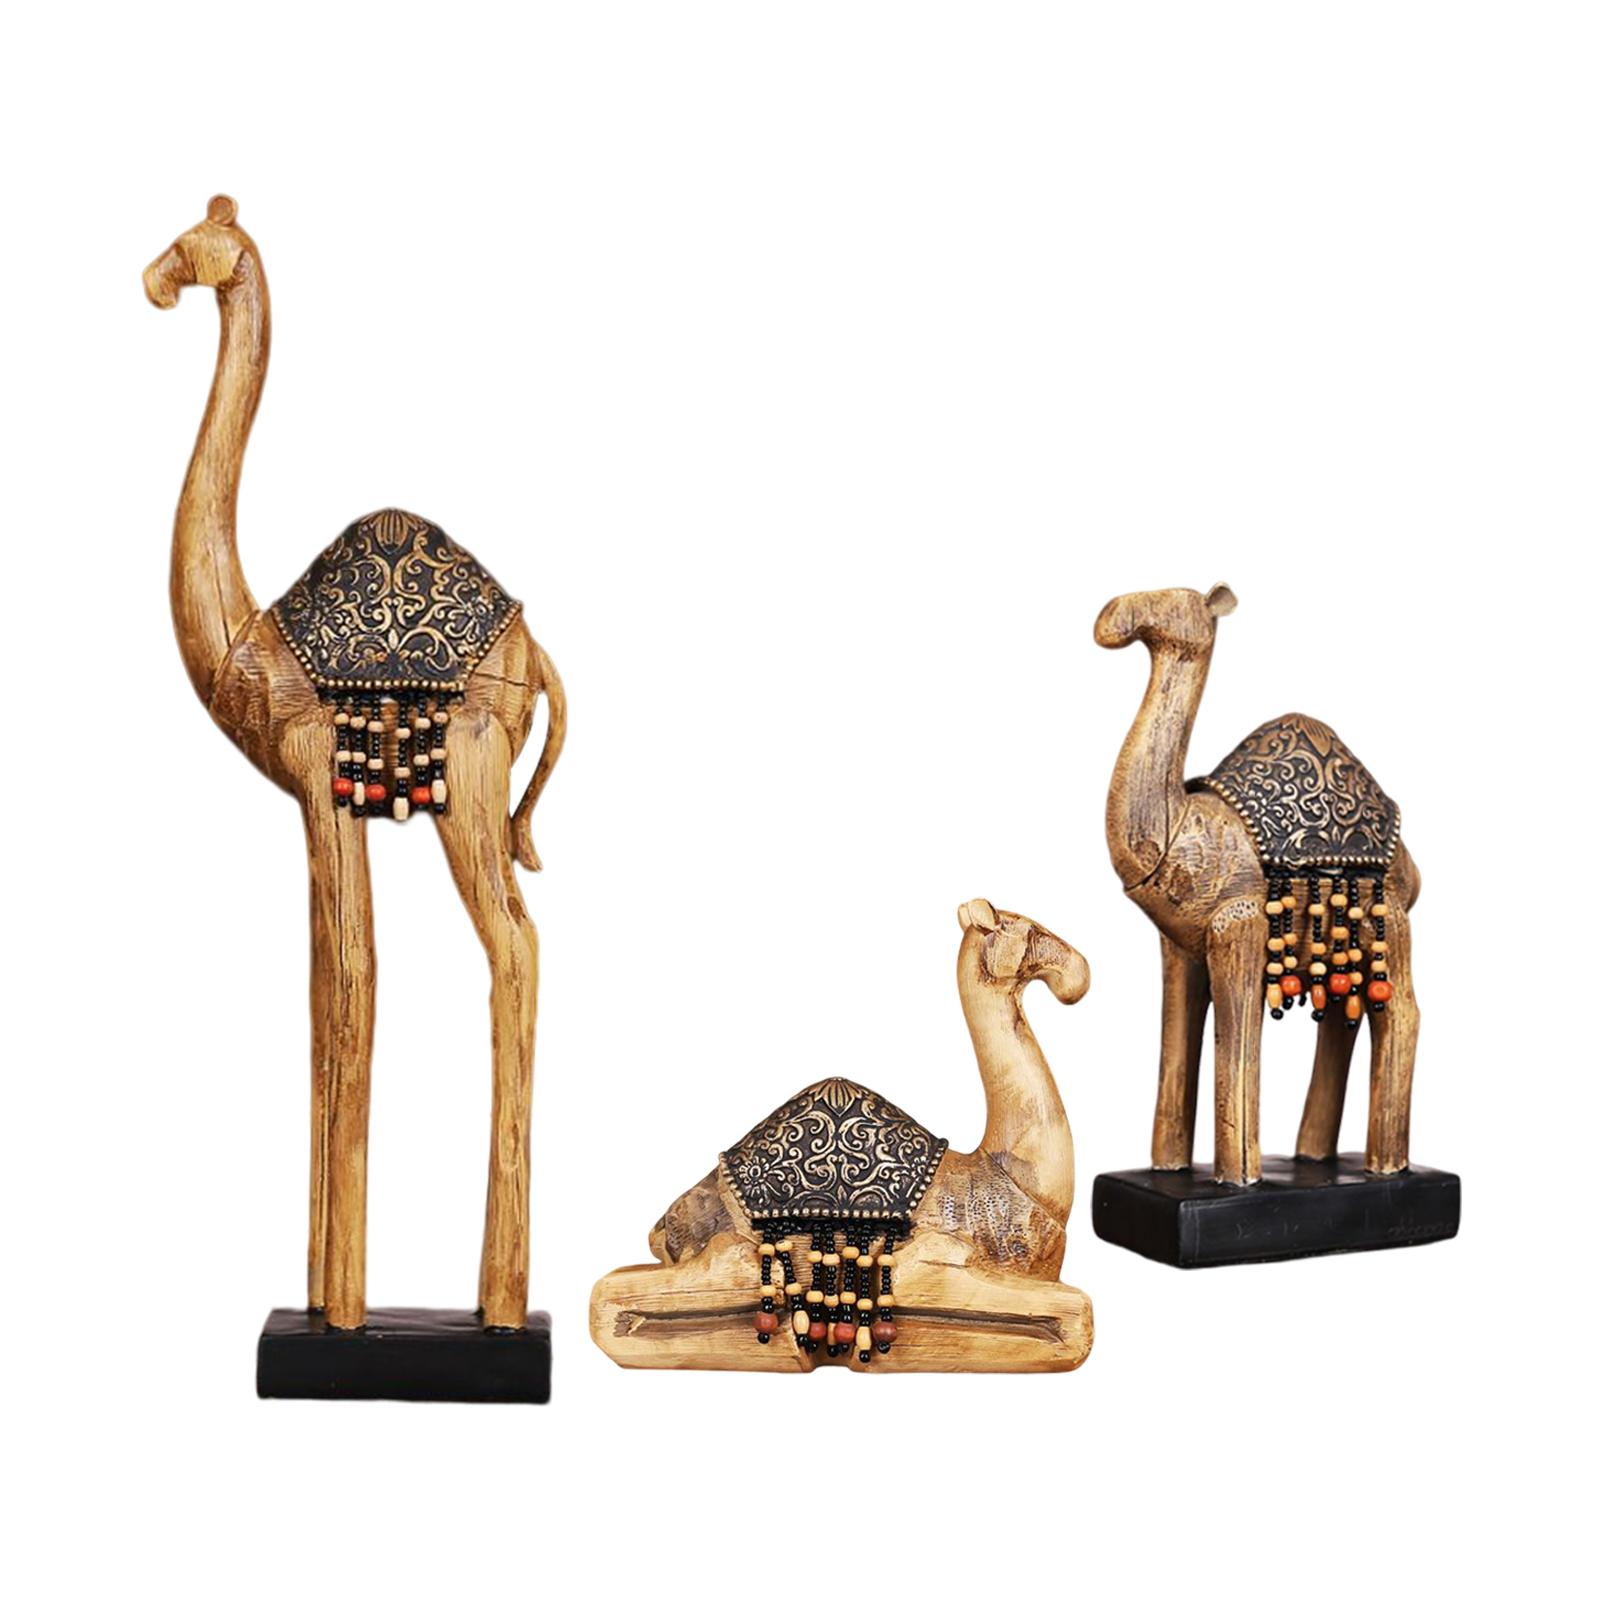 Exquisite Camel Ornament Decoration Collectibles for Centerpieces Display Sitting